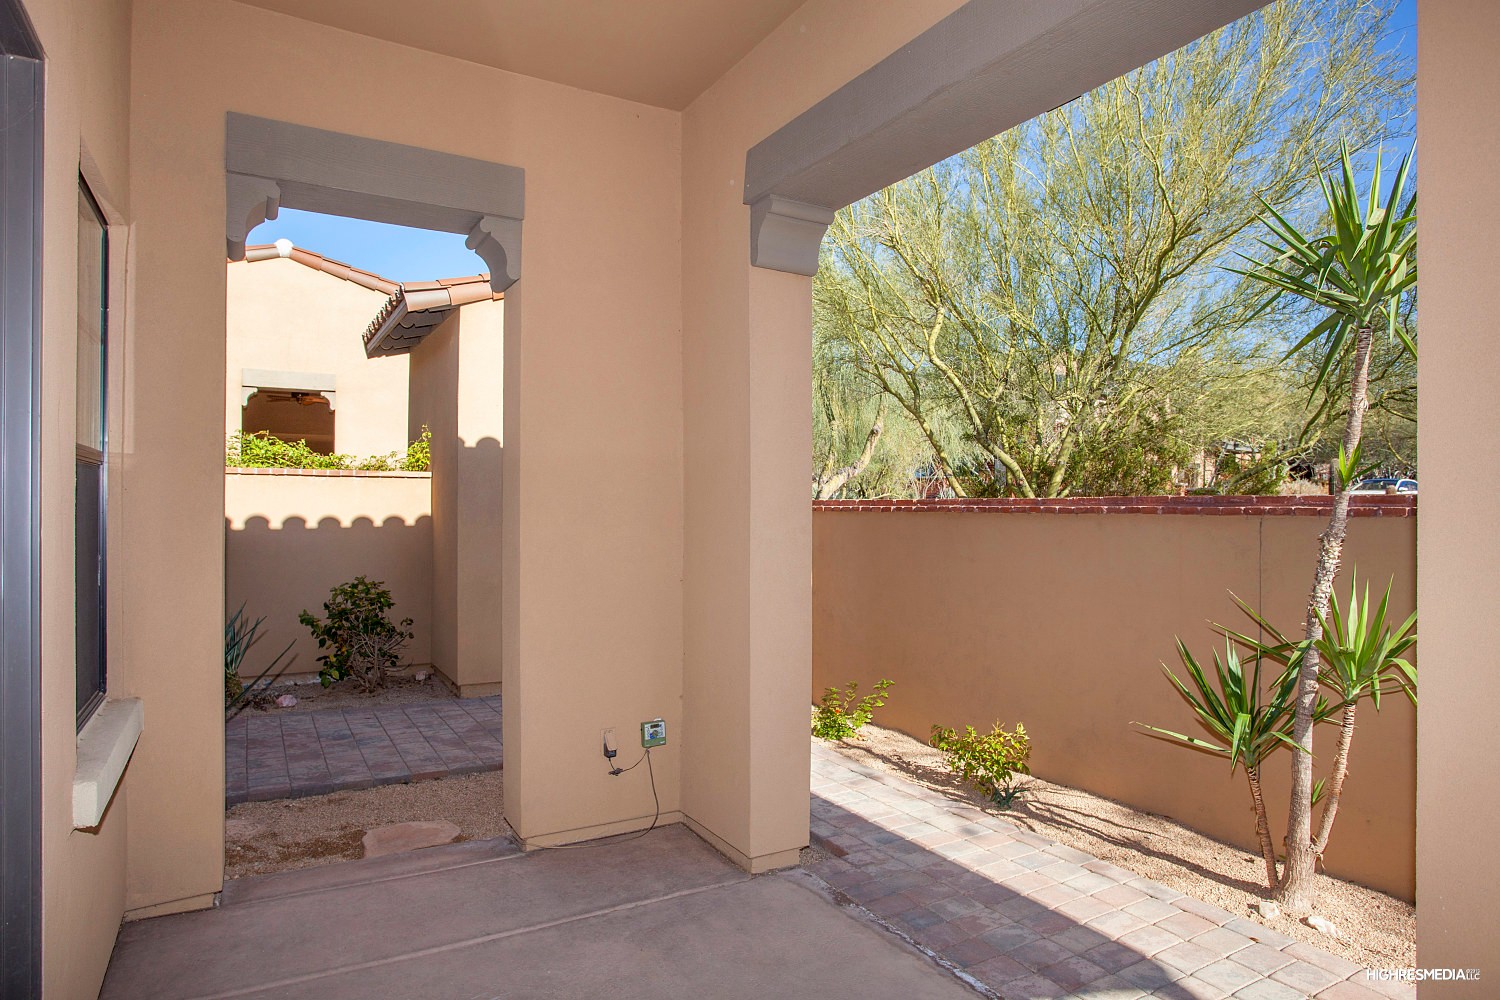 Rear covered patio at this Scottsdale townhome for sale in Market Street at DC Ranch located at 20704 N 90th Pl #1005 Scottsdale, AZ 85255 listed by Don Matheson at The Matheson Team